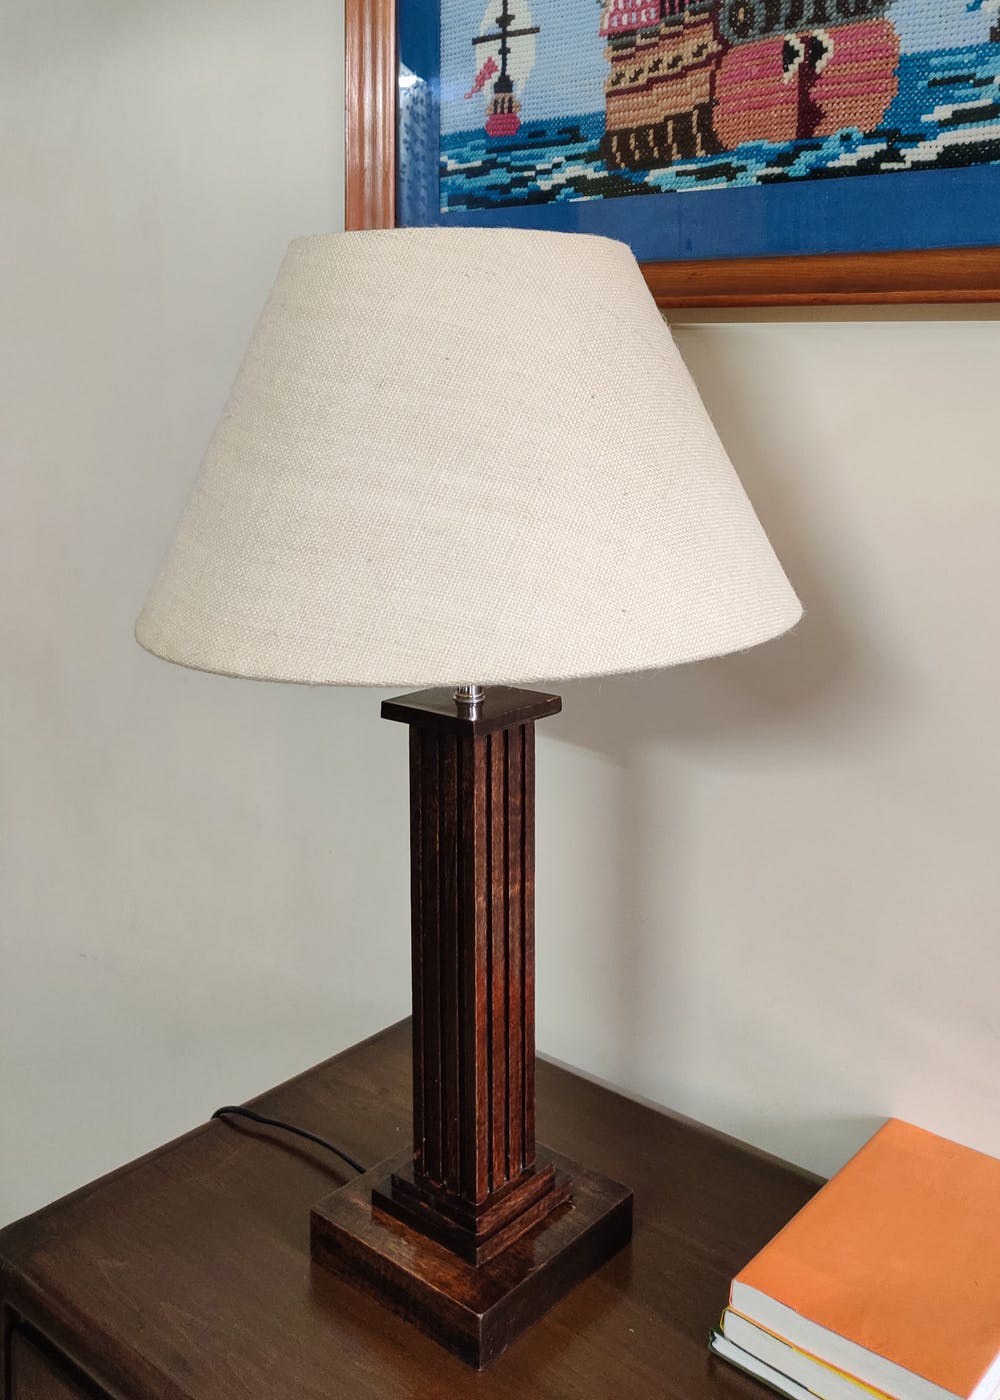 Get Traditional Wooden Square Base, Square Base Table Lamp